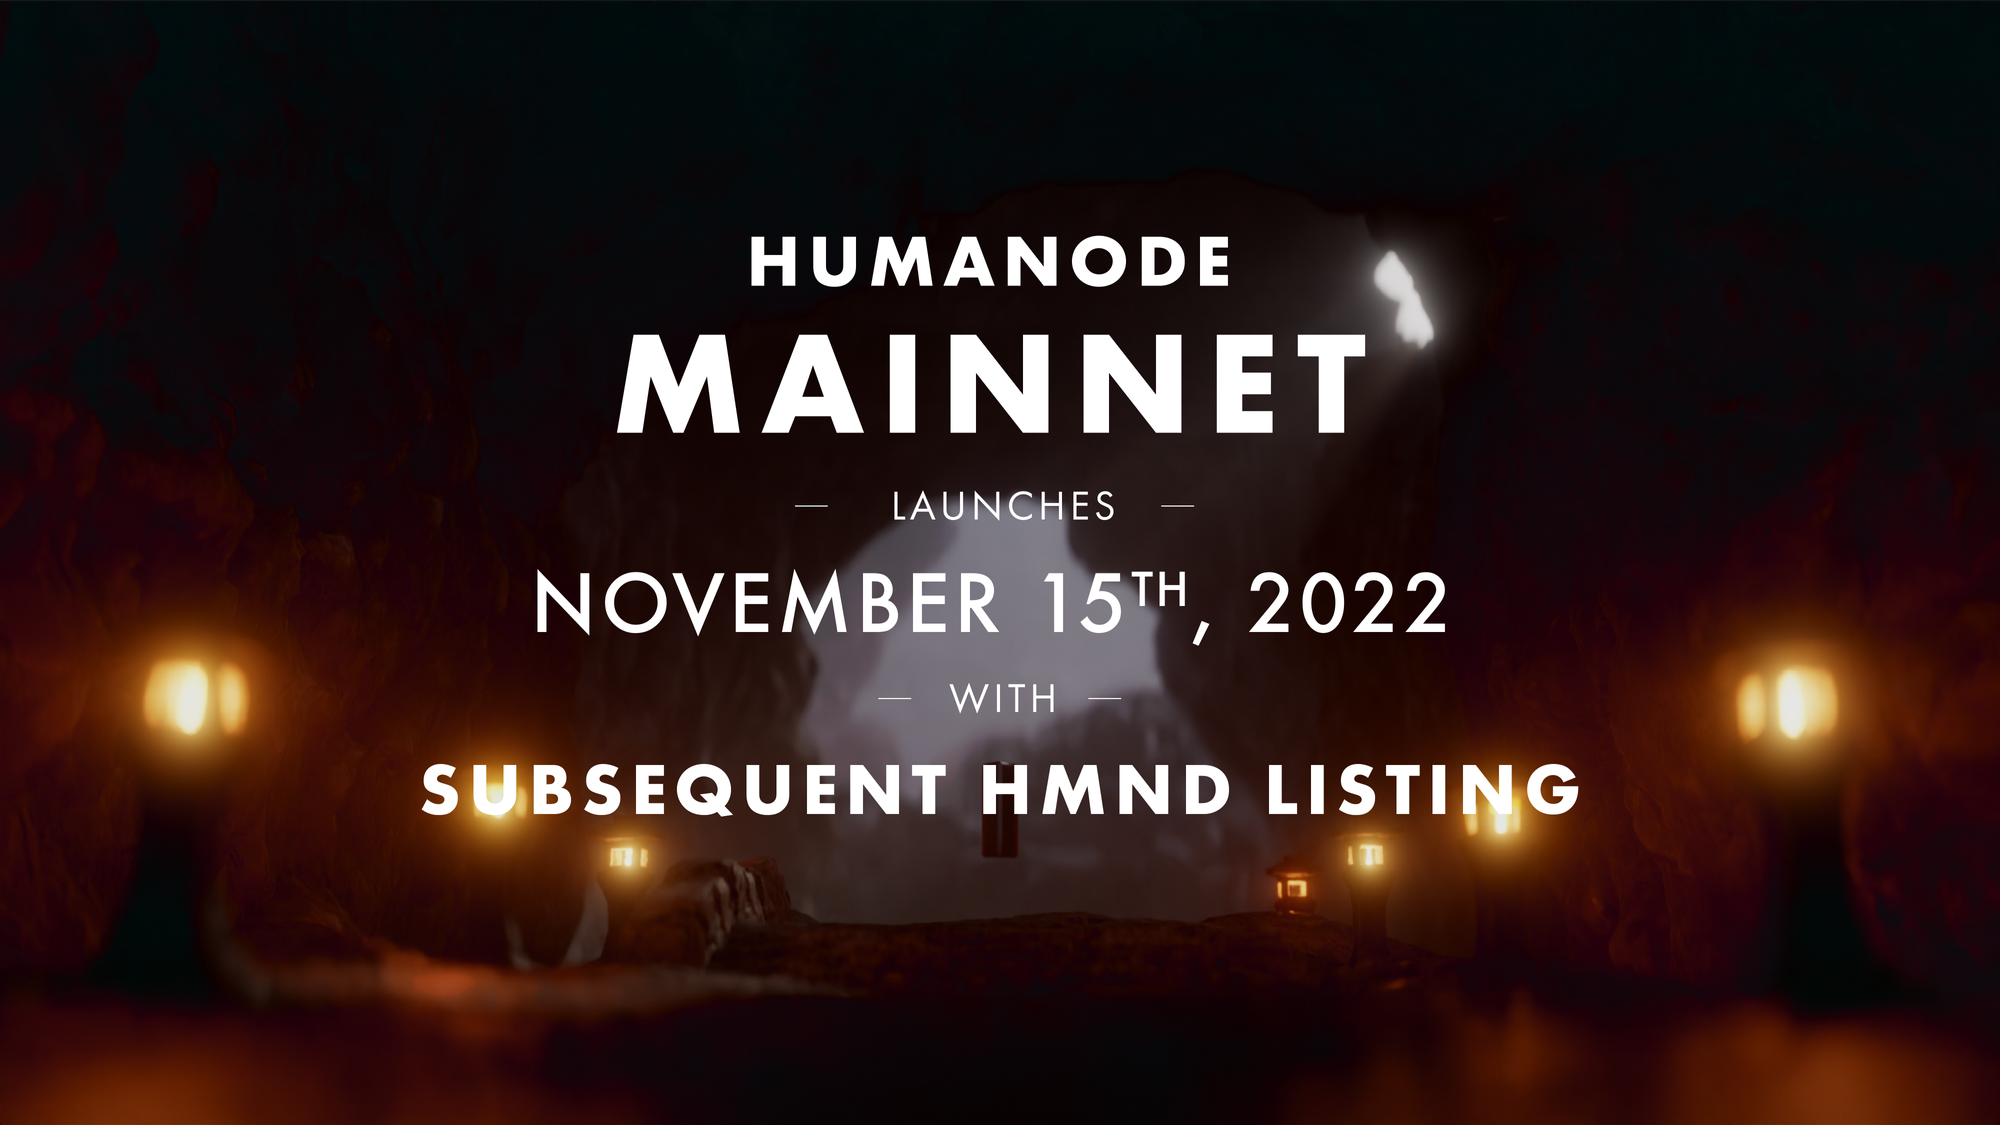 Humanode Mainnet Launches on November 15th, 2022 with Subsequent HMND Listing